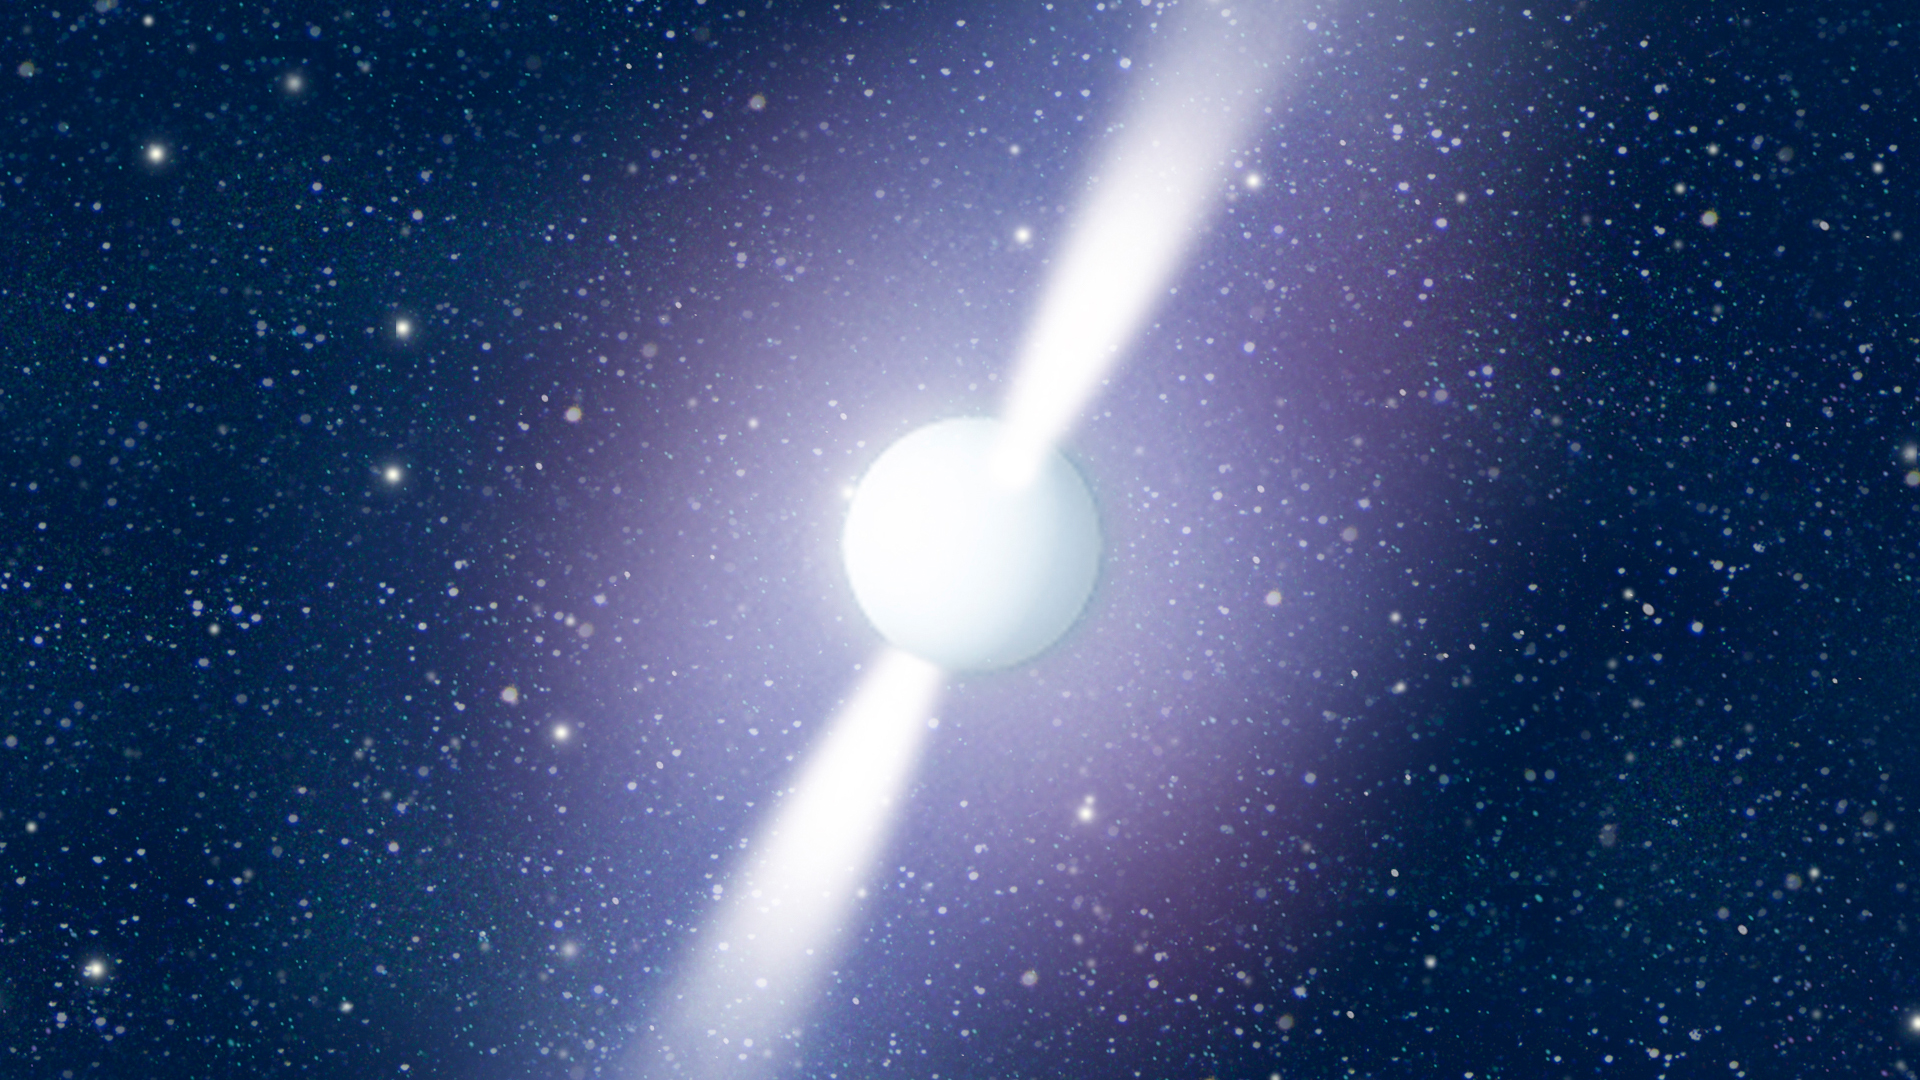 Two “dead suns” were spotted in an epic collision that sent shockwaves through the universe